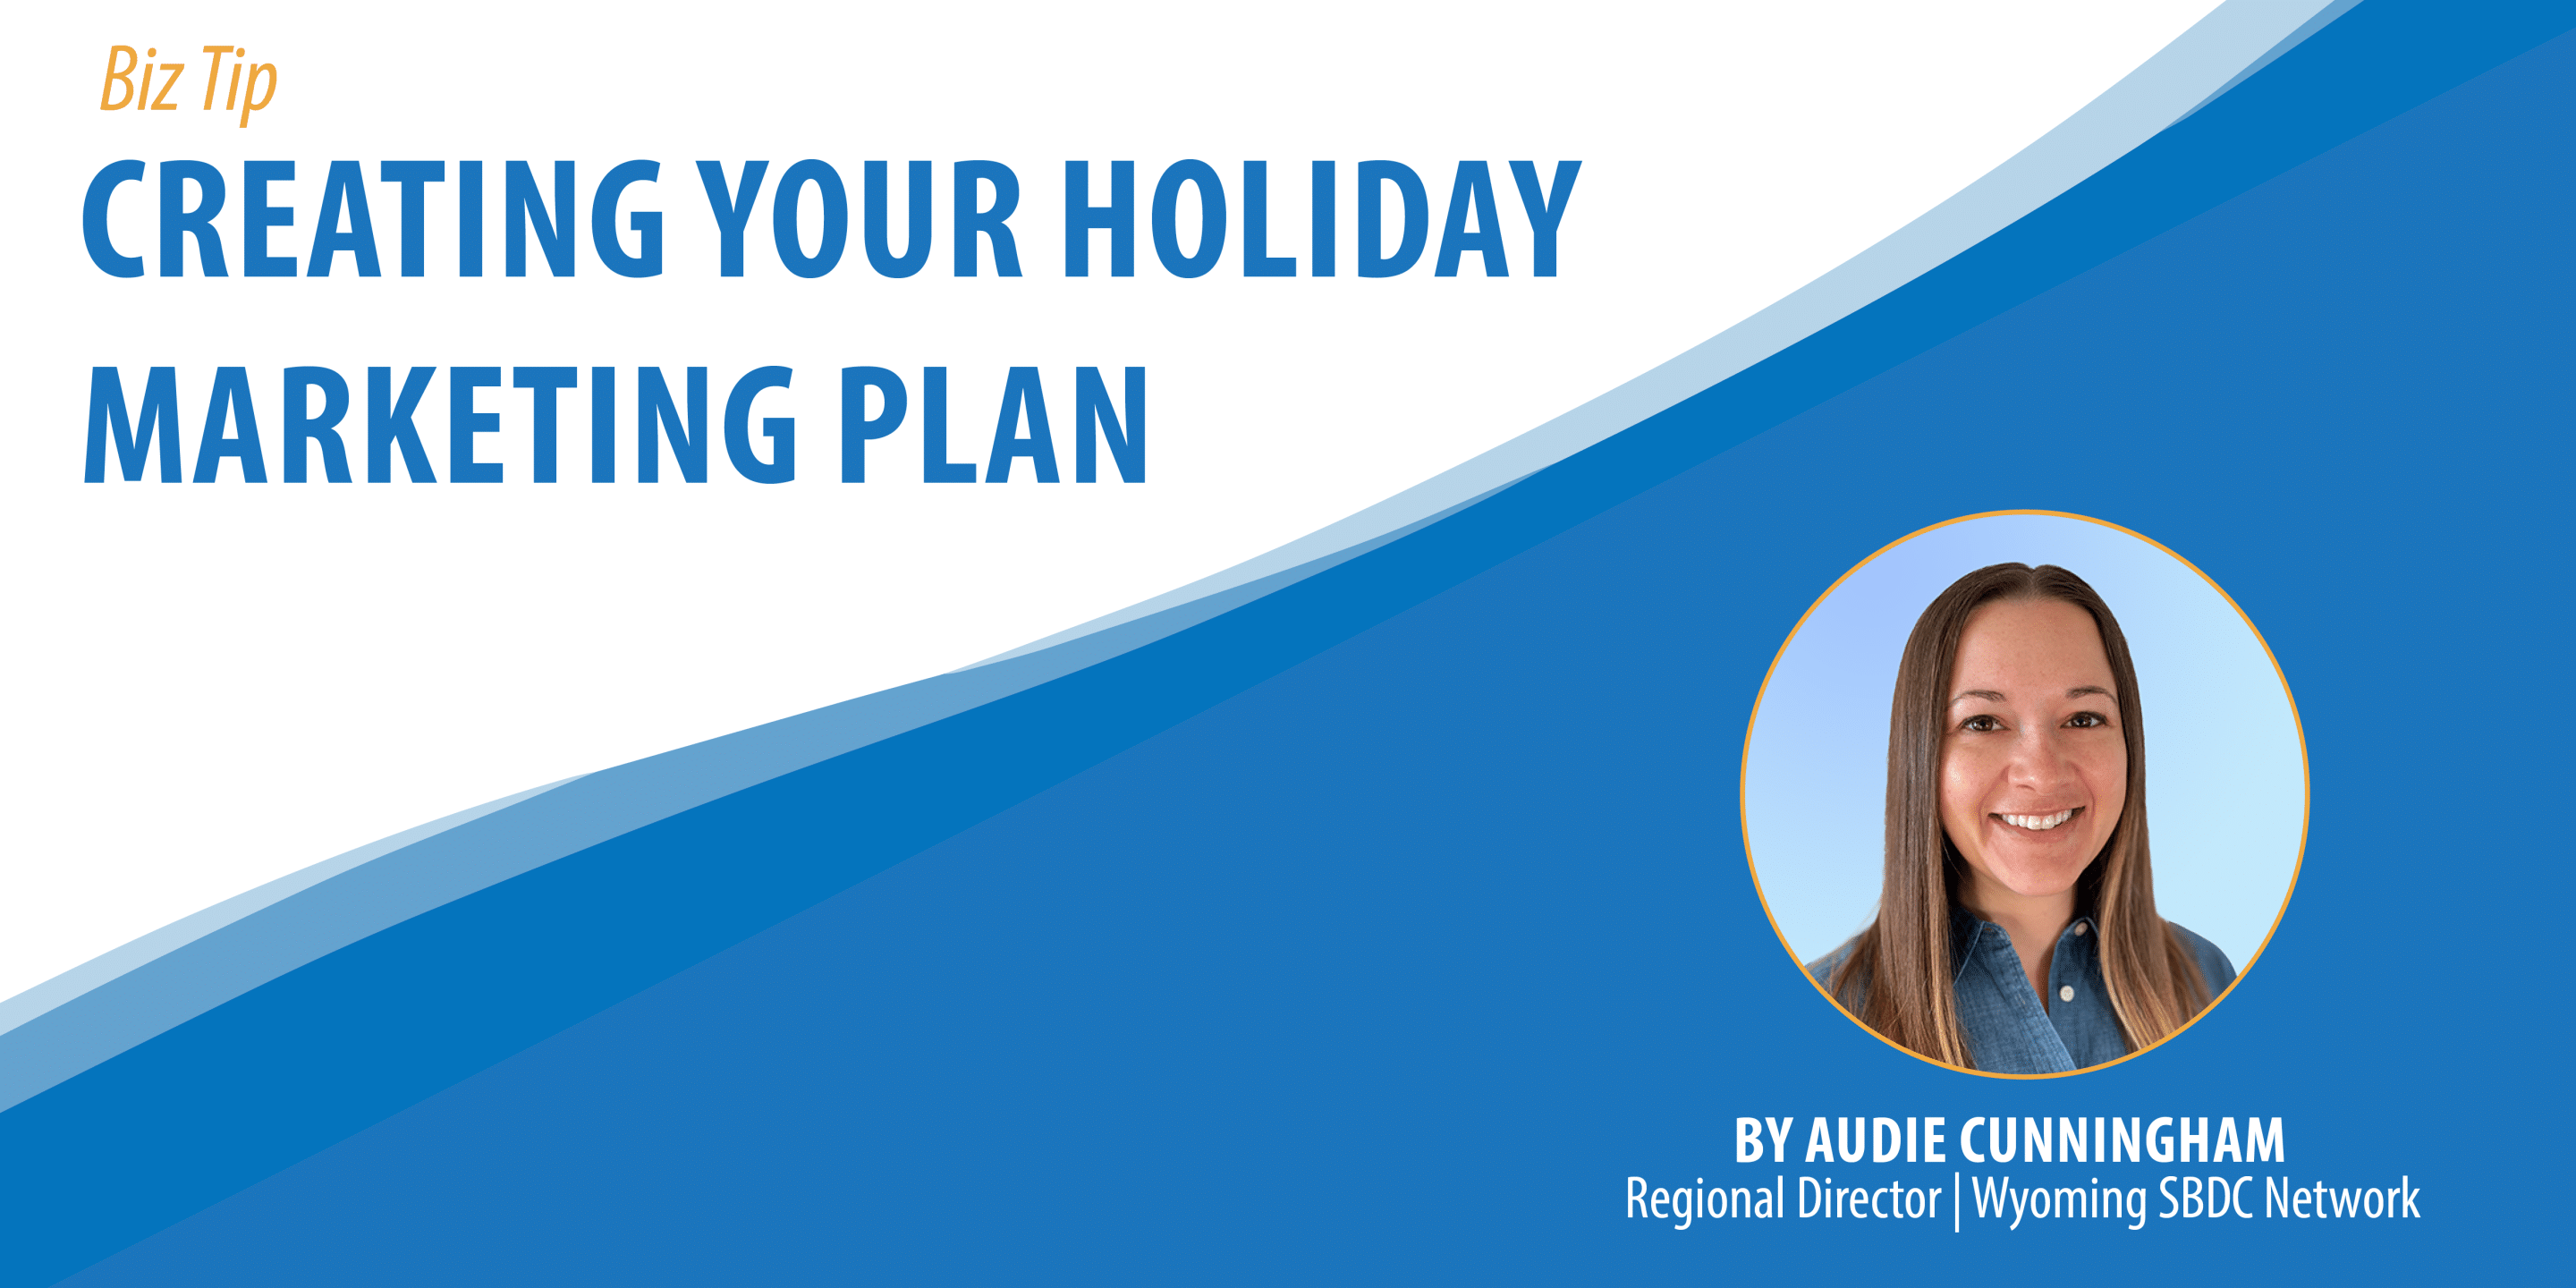 Creating Your Holiday Marketing Plan